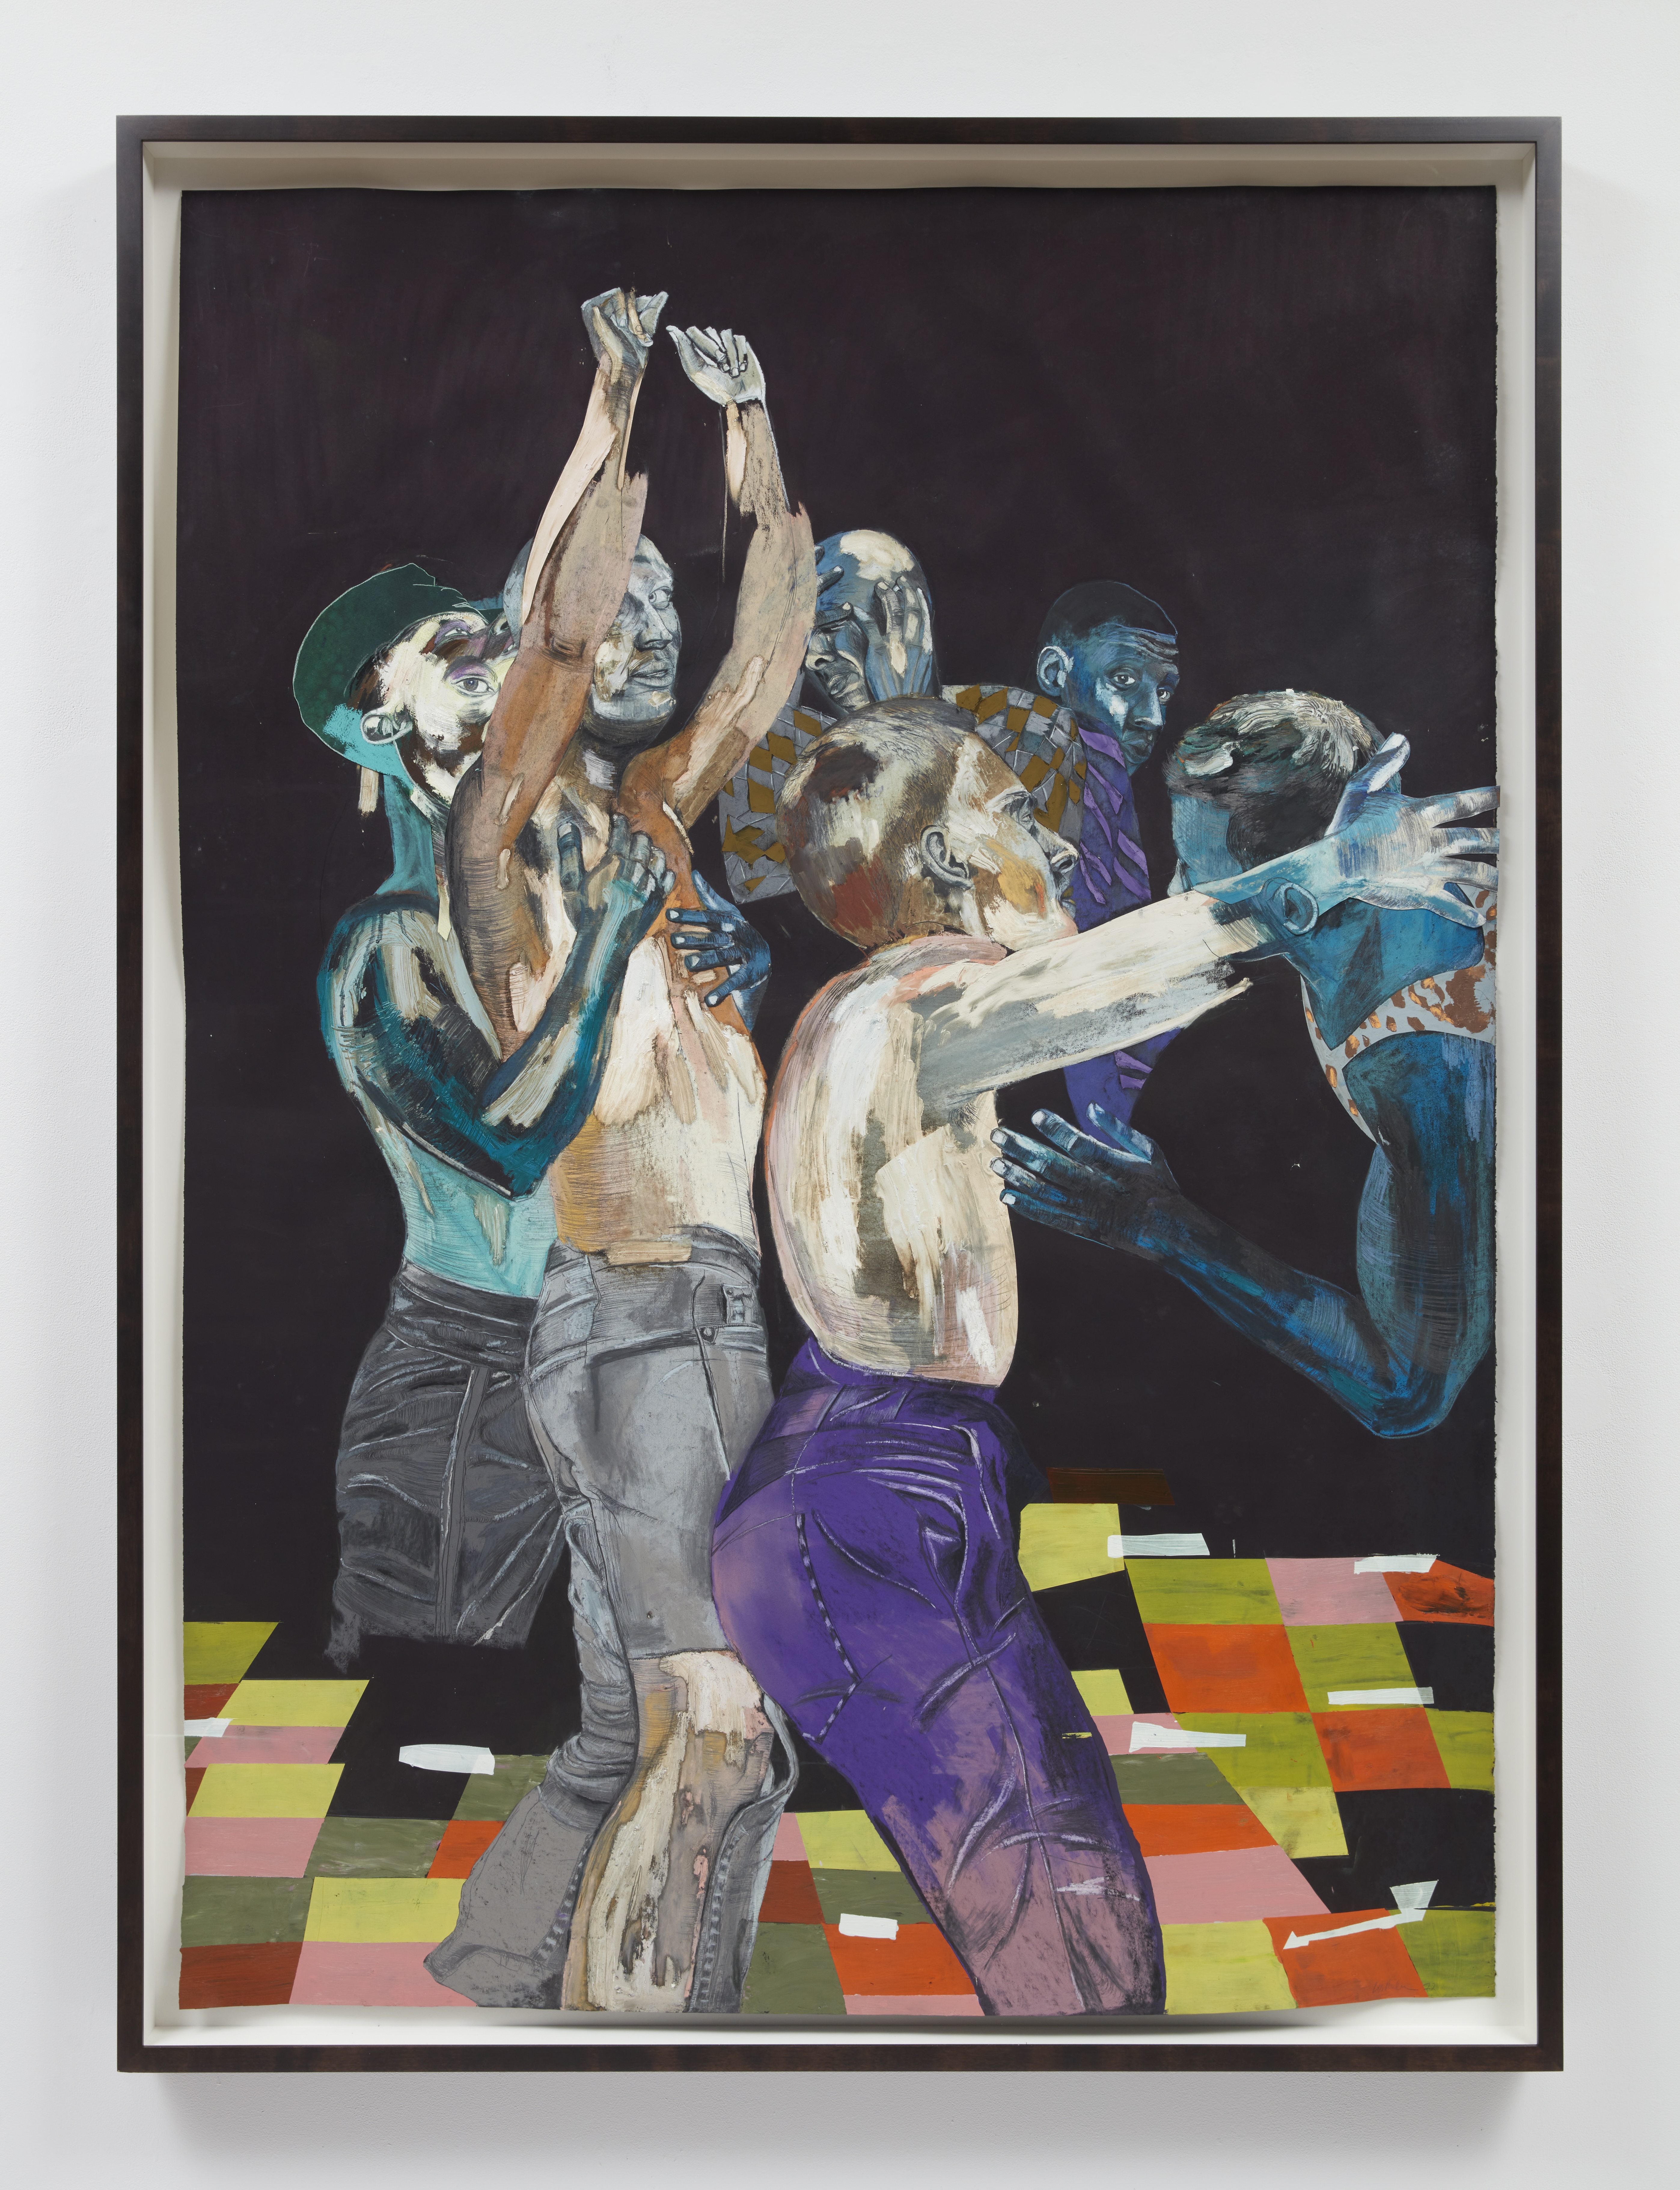 Warde l l Milan b. 1977, Knoxville, Tennessee; active in New York, New York Pulse. That’s that Orlando moon, 808 club bass. That’s that keep dancing, that’s that never stop 2022 Charcoal, graphite, oil pastel, pastel acrylic, cut - and - paste paper on hand - dyed paper 72 1/2 x 52 3/8 in. The C ollection of Michael Hoeh, New York, c ourtesy of Sikkema Jenkins & Co., New York , © Wardell Milan